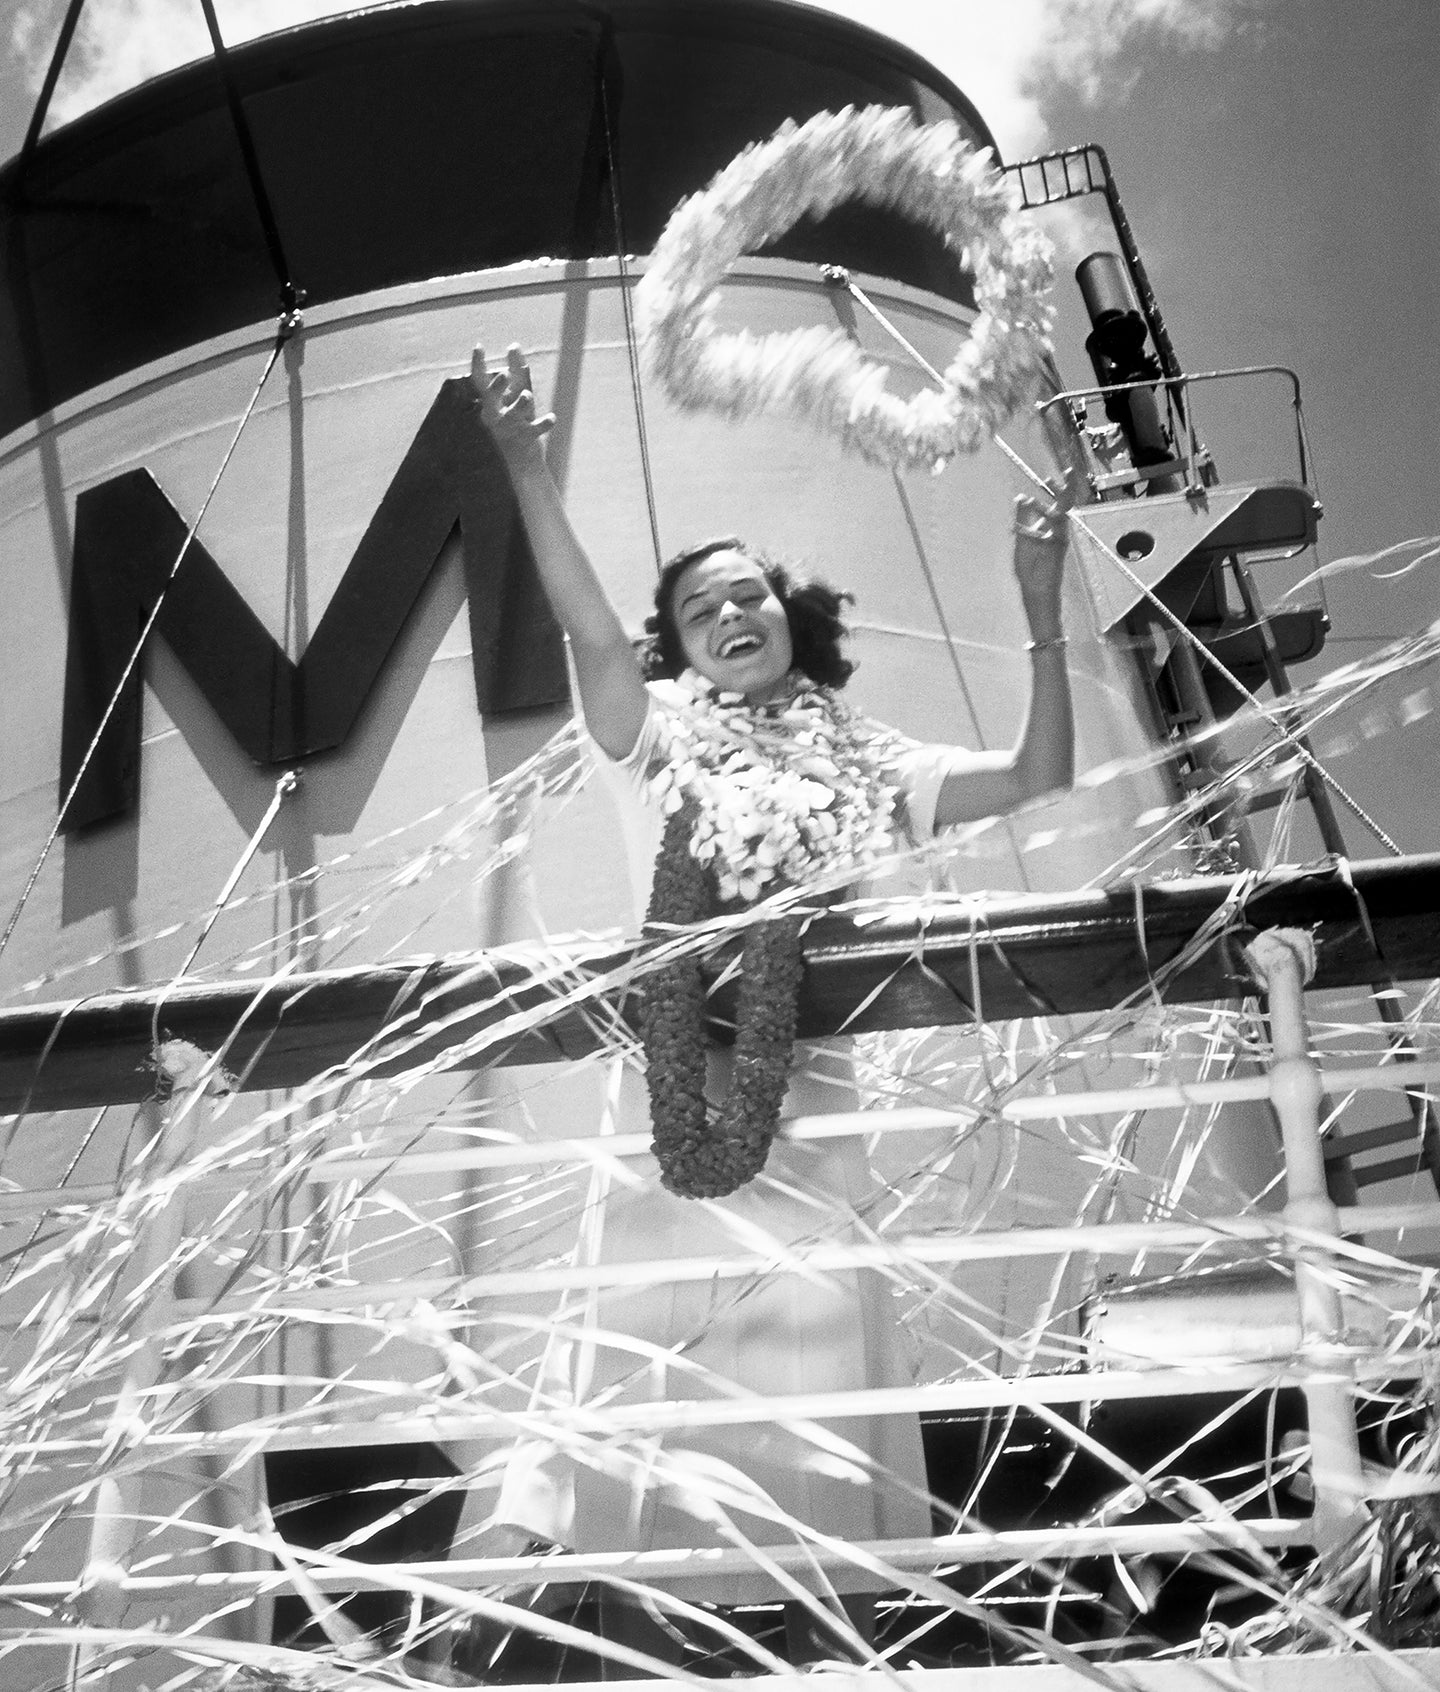 Black and white photograph of a woman wearing multiple flower leis and standing on the top deck of a Matson Line cruise ship tossing a flower lei in the air. The Matson 